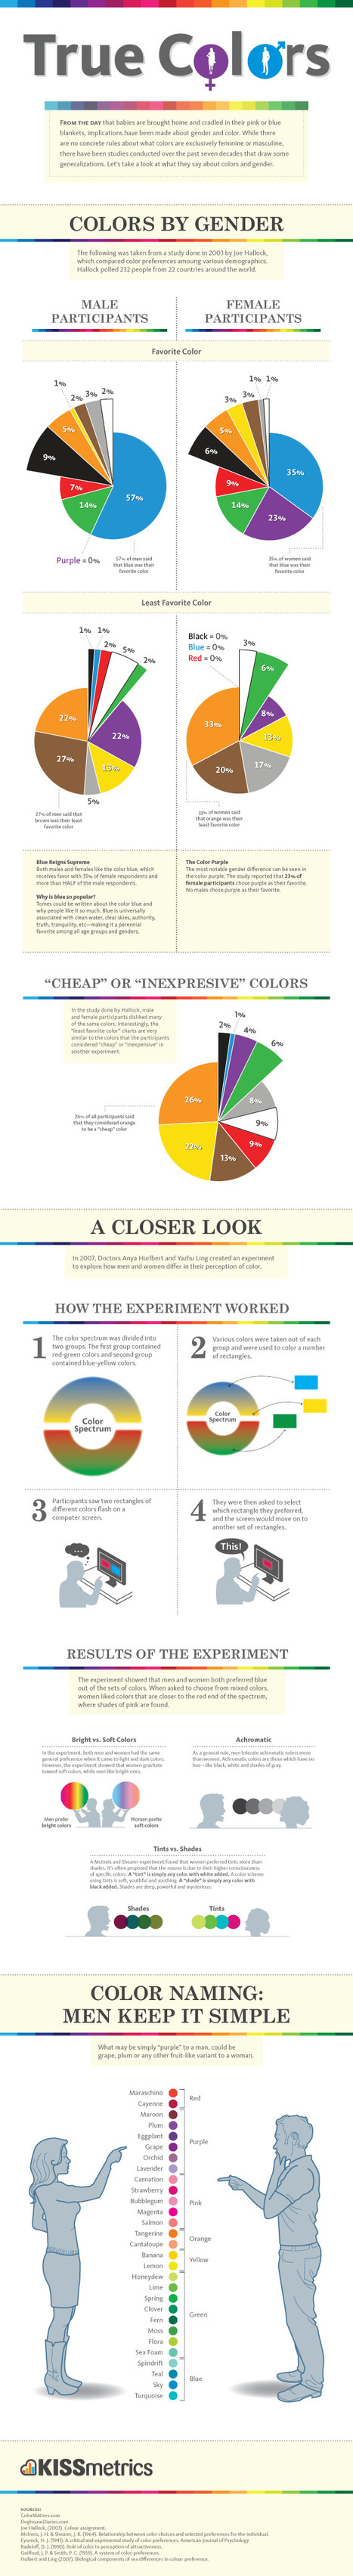 Color Is Master Of Us All: Color Preference By Gender [Infographic] | BI Revolution | Scoop.it